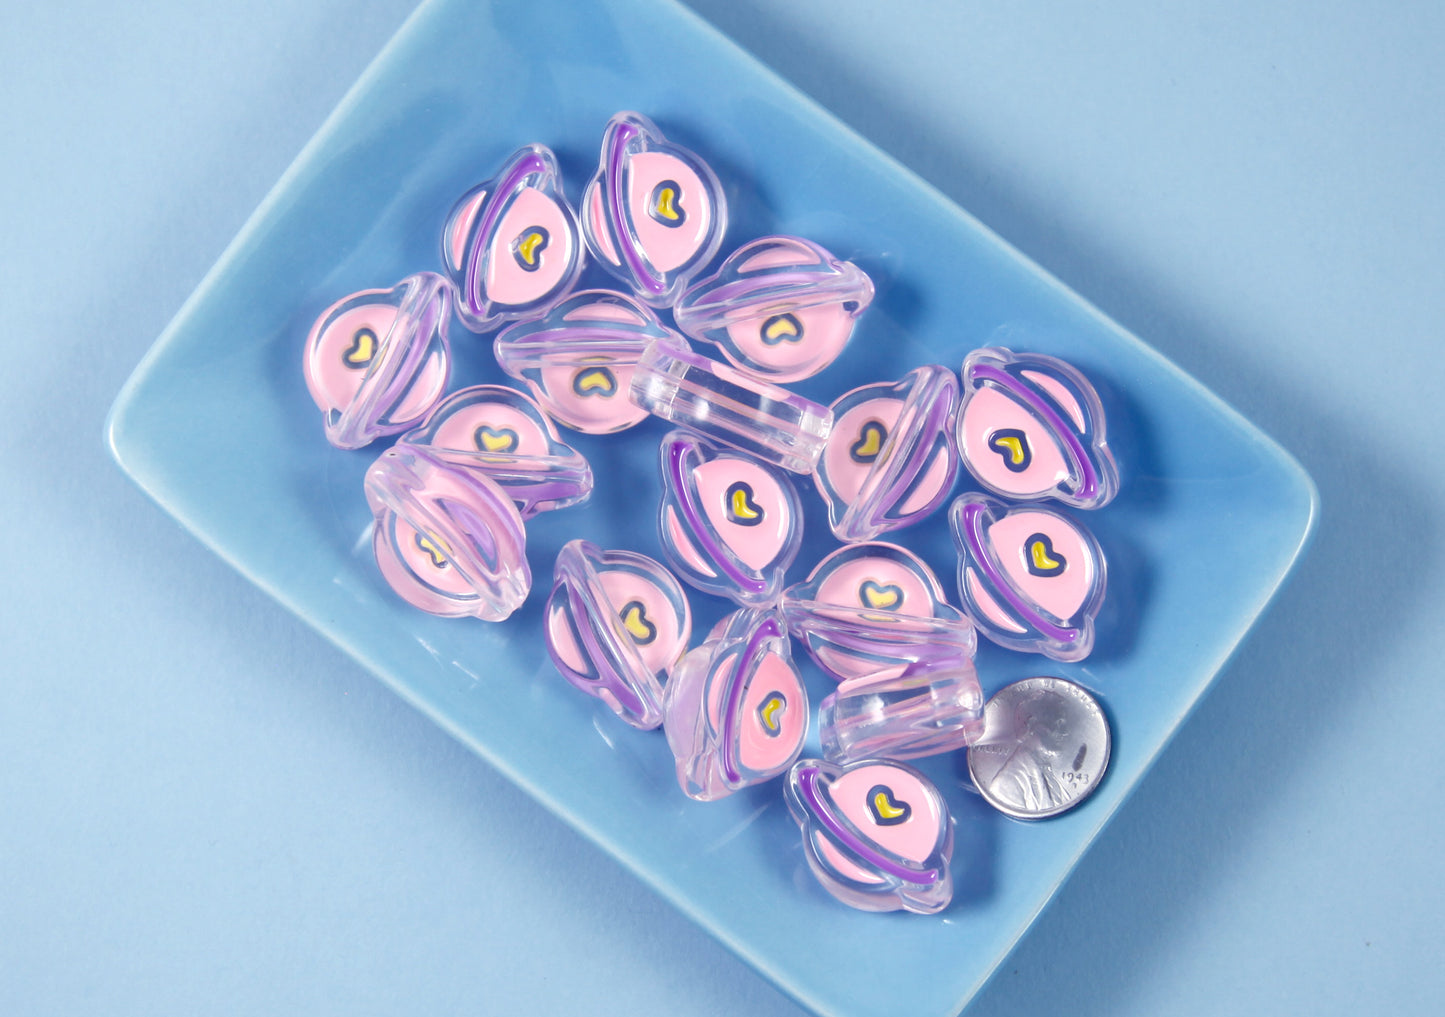 Pastel Beads - 26mm Saturn Planet Enamel Style Acrylic Beads or Resin Beads - 10 pc set